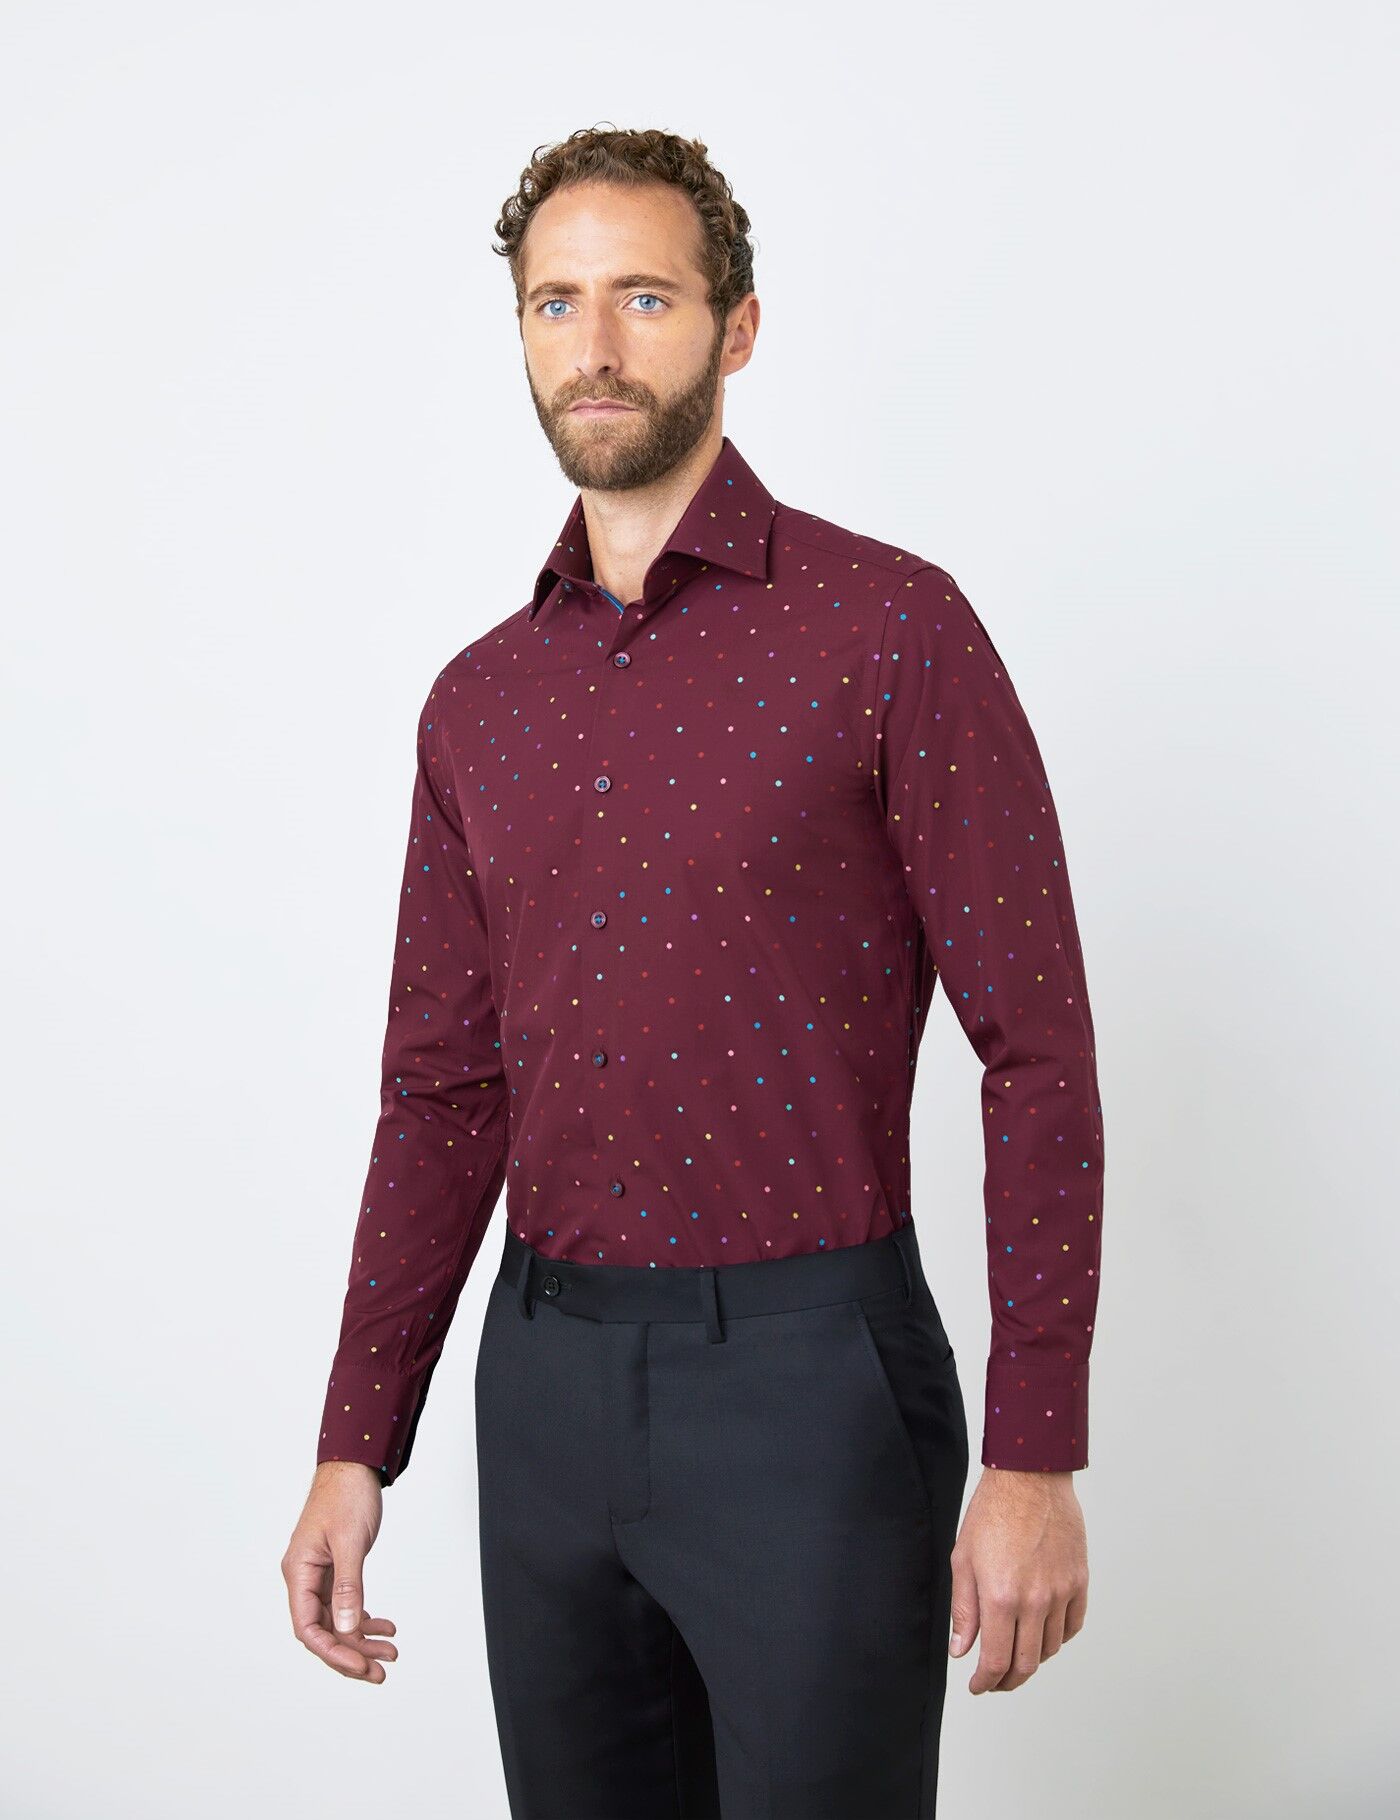 Hawes & Curtis Men's Jacquard Small Spots Piccadilly Relaxed Slim Fit Shirt in Burgundy   Low Collar   Single Cuff   Hawes & Curtis